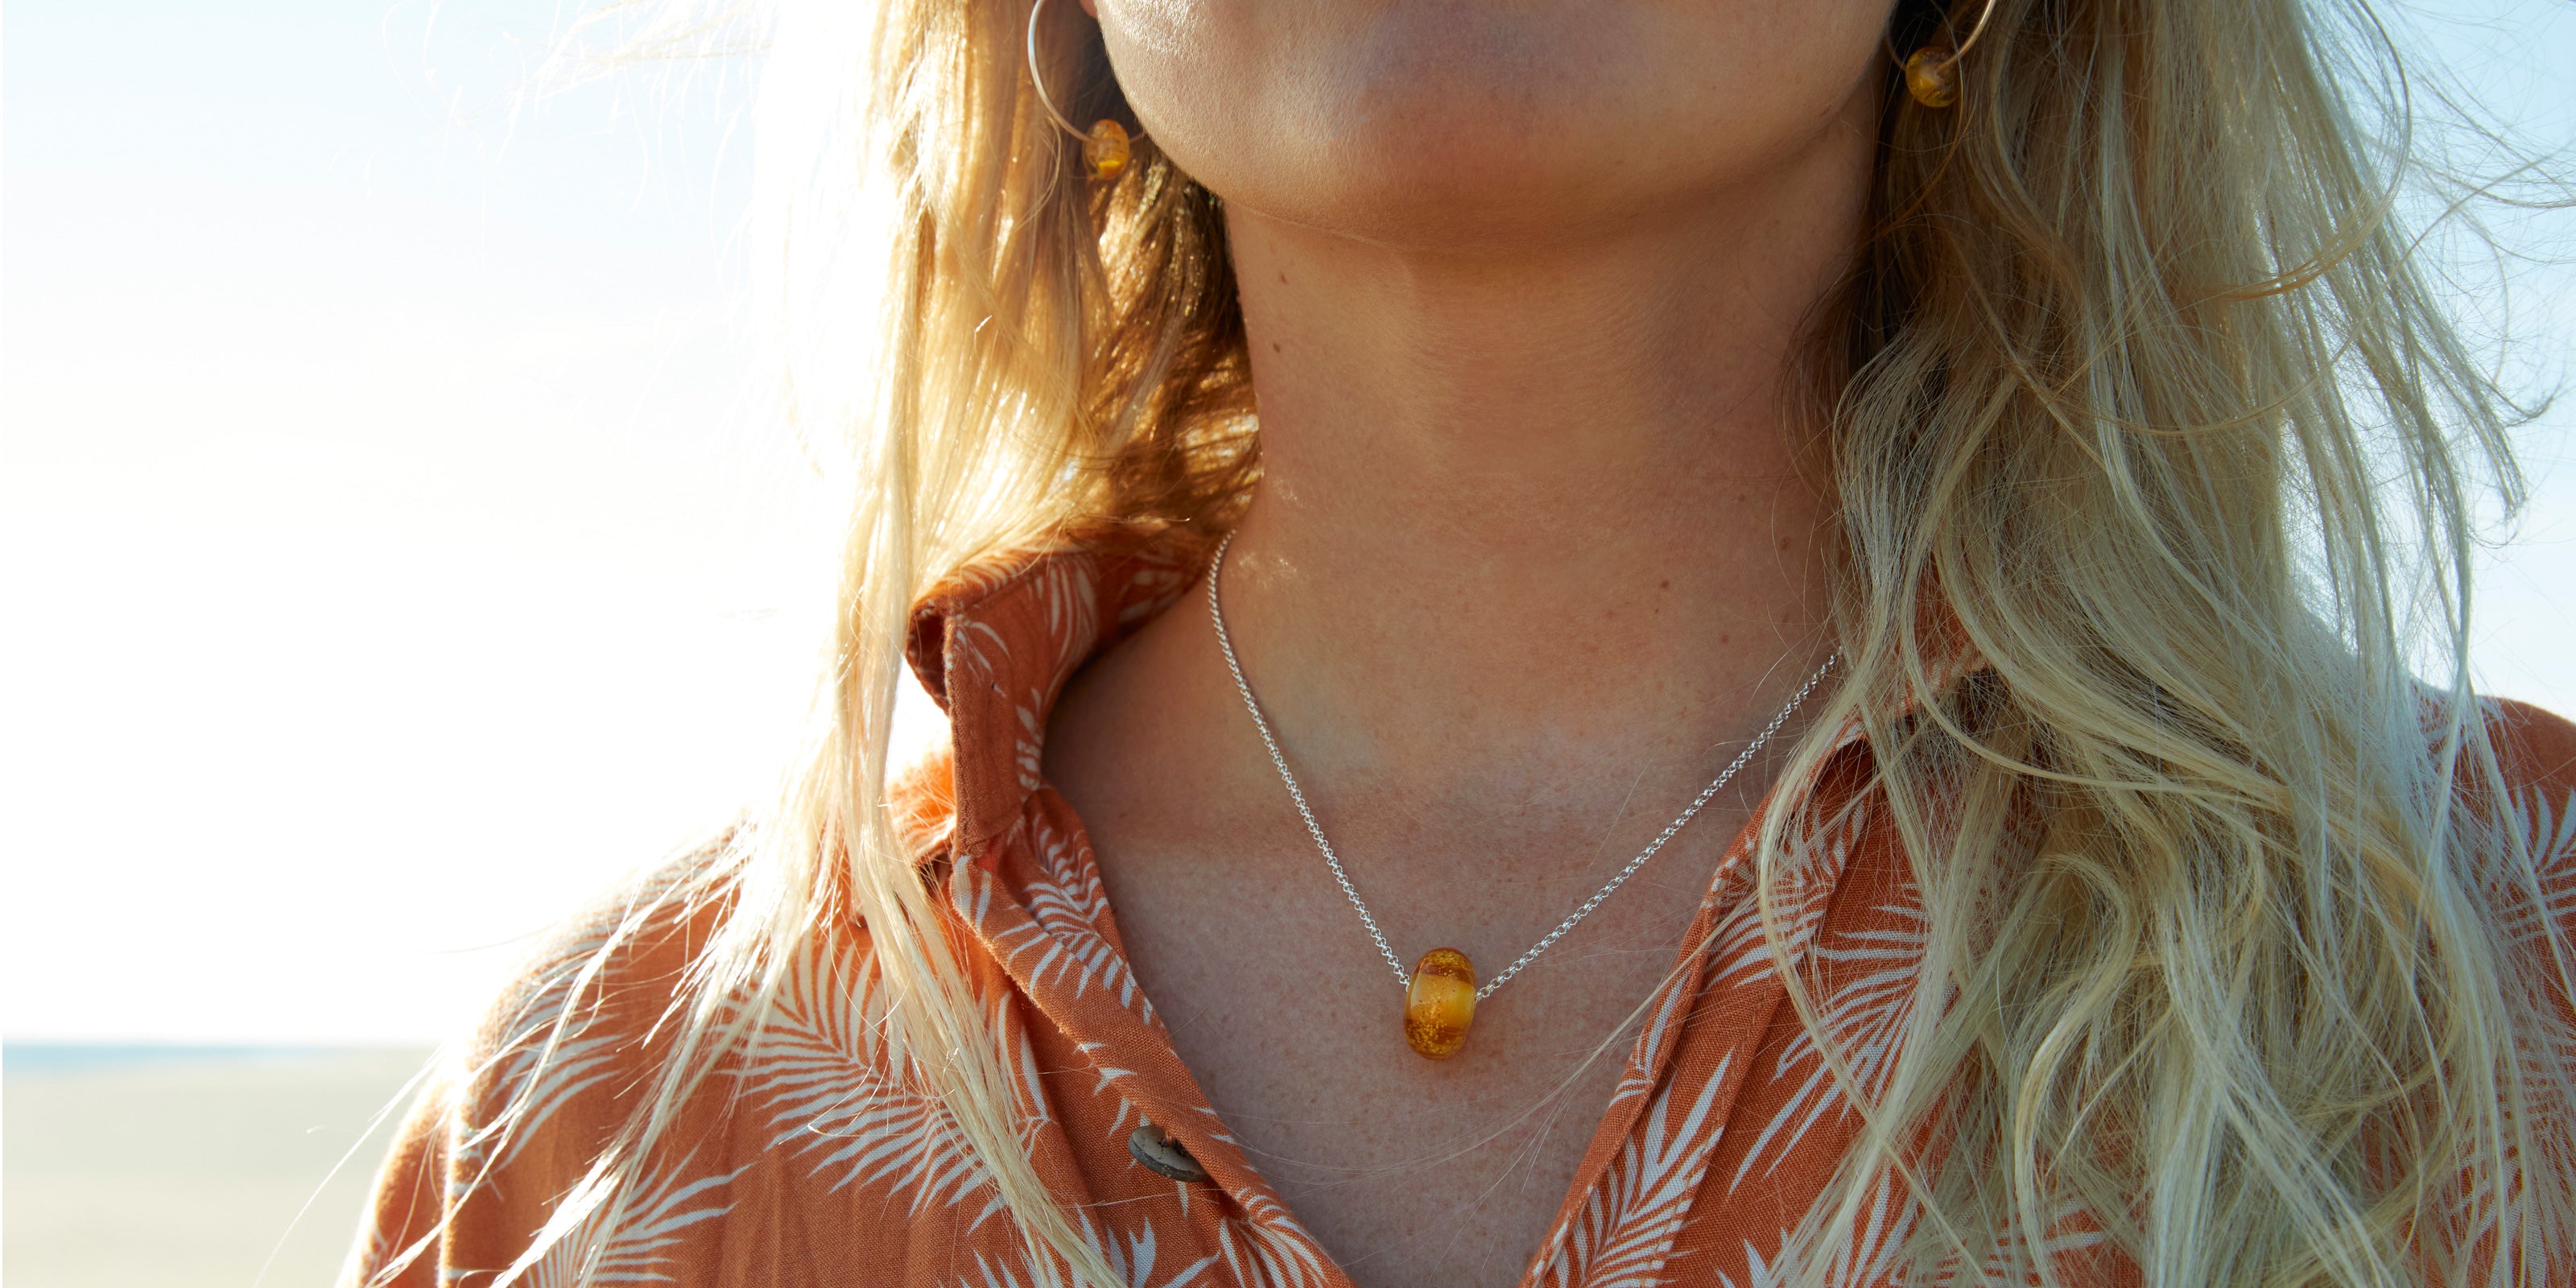 Girl on beach wearing amber glass sand bead necklace and earrings.